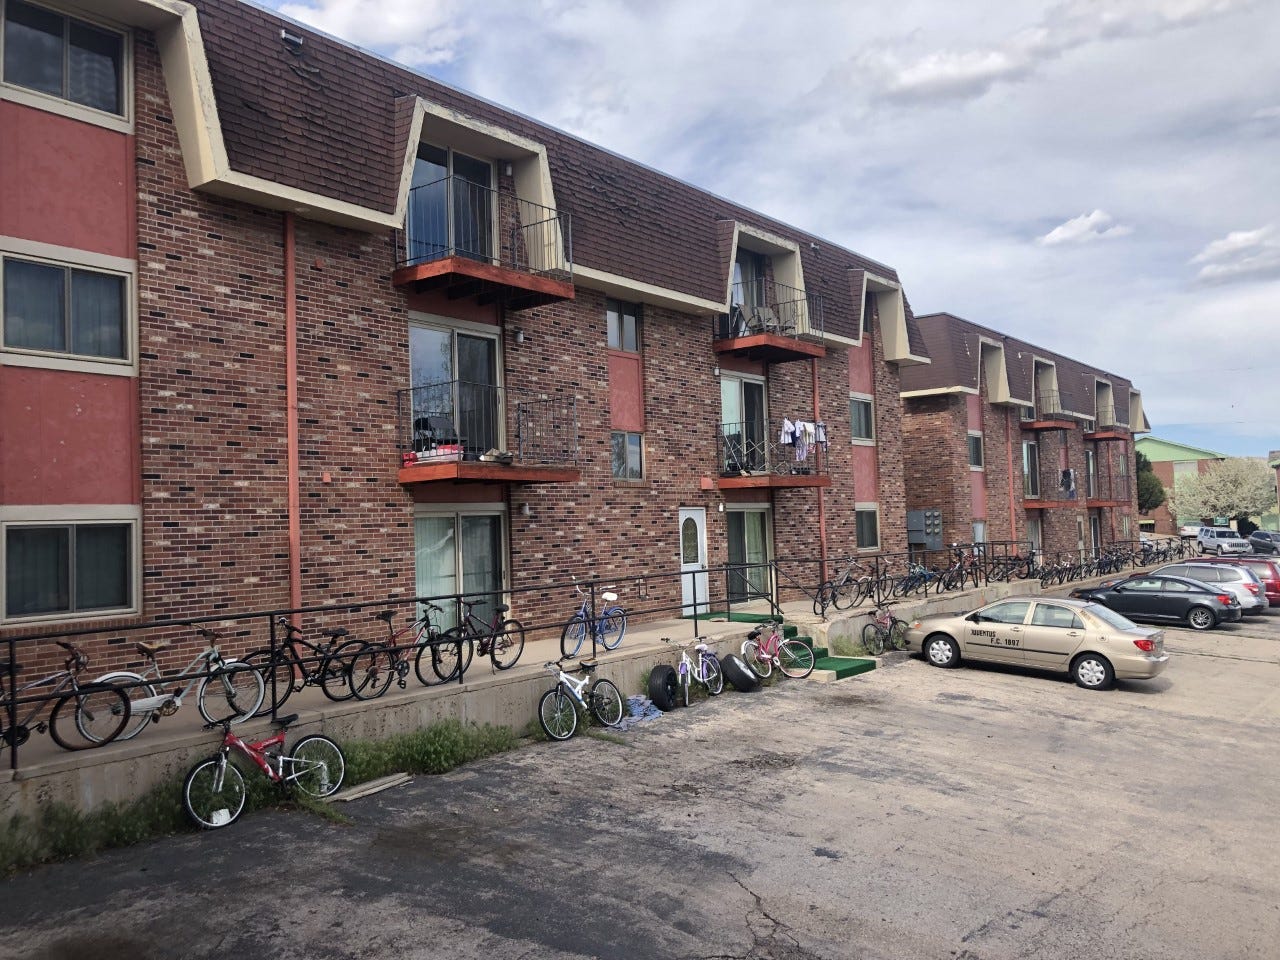 Two buildings, both brick and three stories tall, sit before a gray, cloudy sky. Bicycles and cars clutter the foreground.